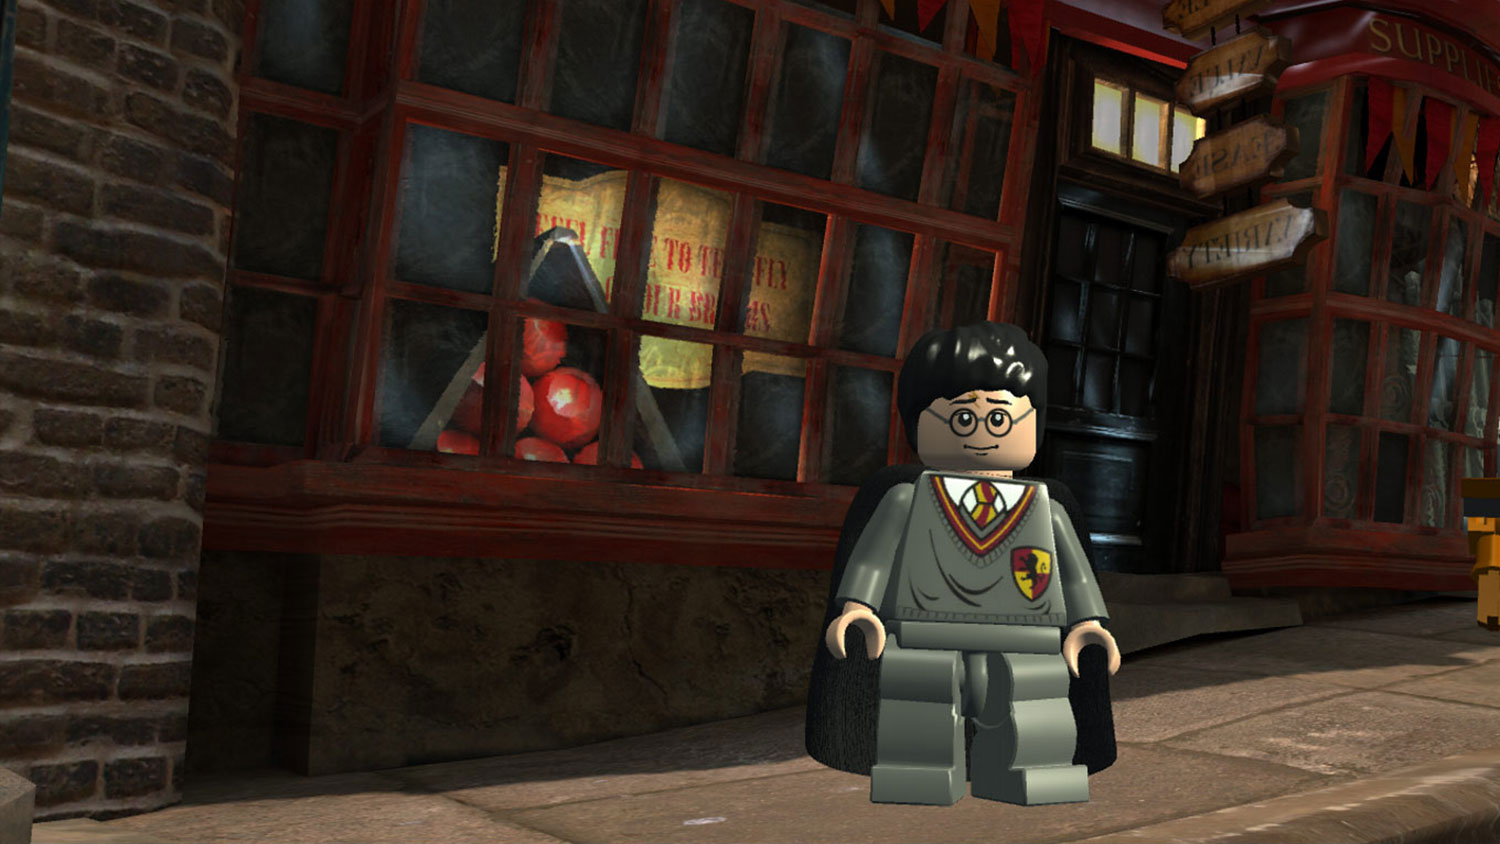 Remastered LEGO Harry Potter: Collection games coming soon to new